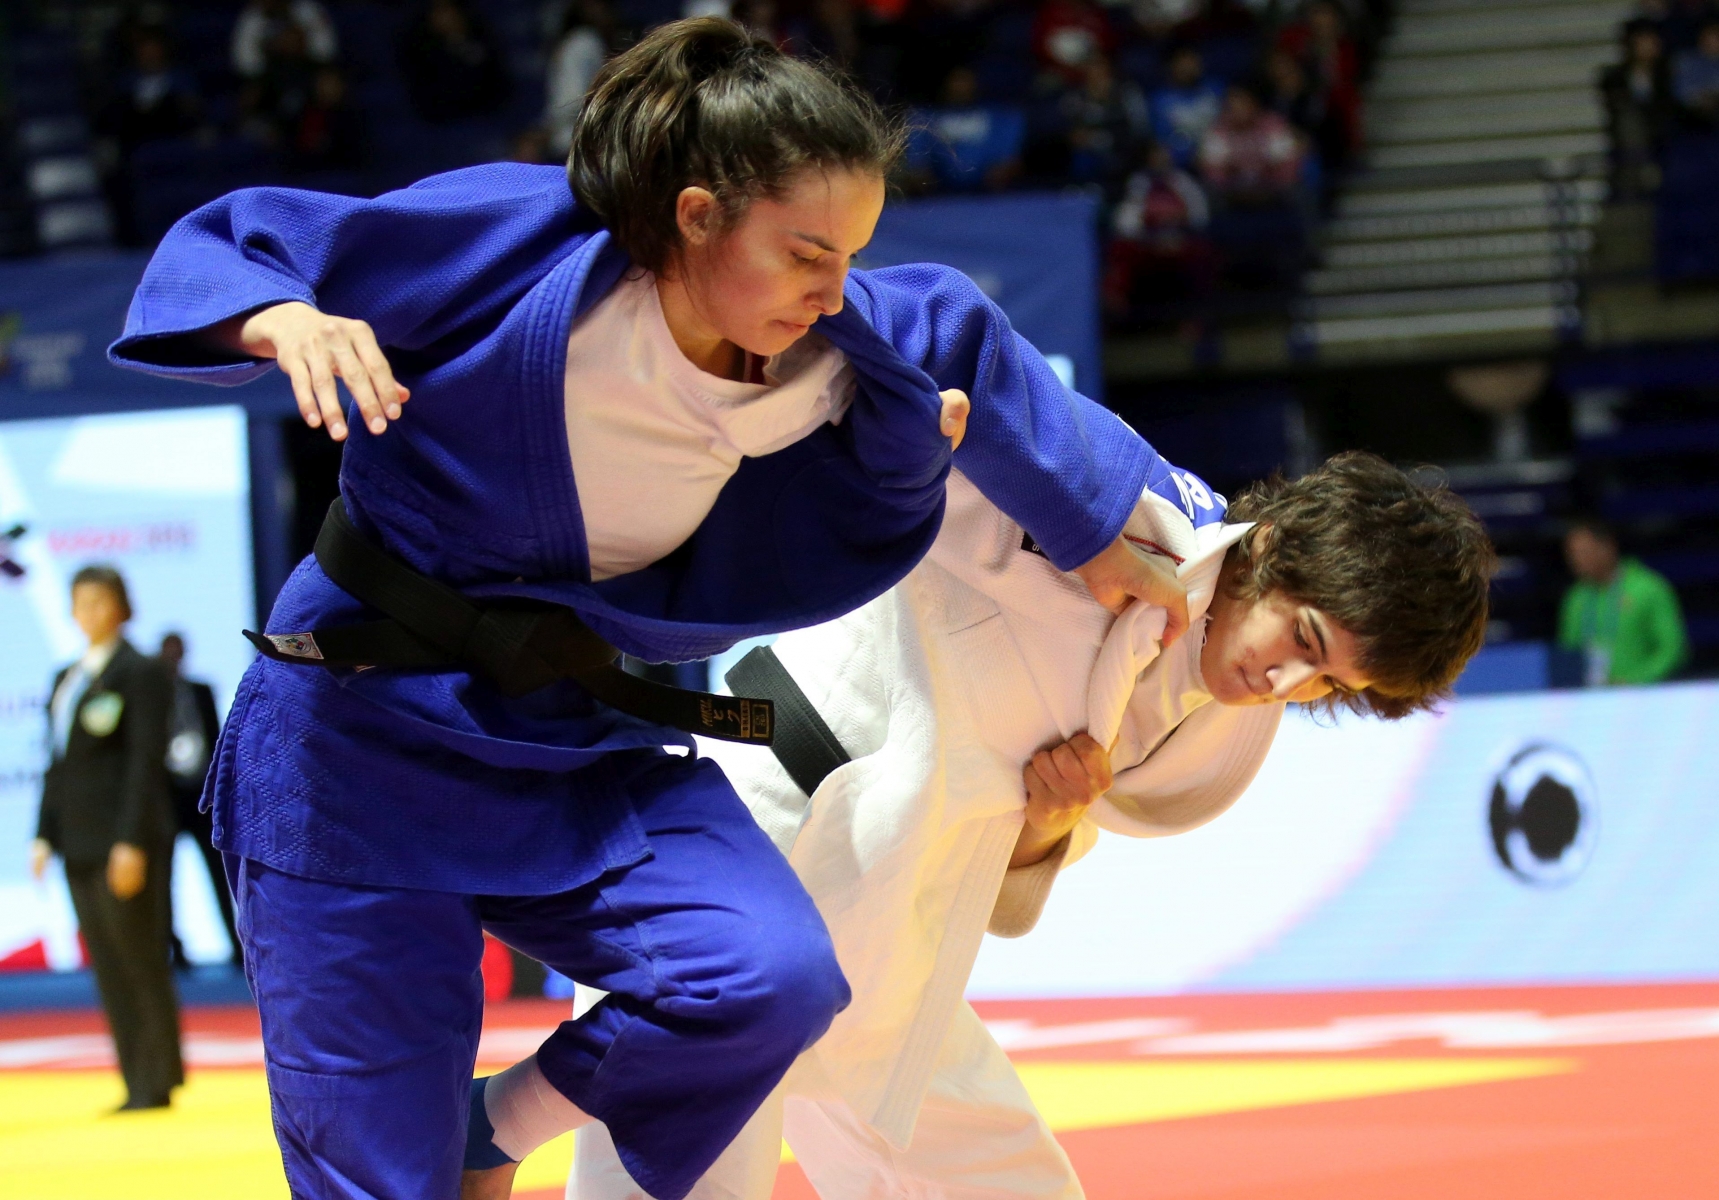 epa05270423 Emilie Amaron of Switzerland (blue) in action against Jaione Equisoain of Spain (white) during their Women's -57 kg category elimination bout at the European Judo Championships at the TatNeft Arena in Kazan, Russia, 21 April 2016.  EPA/MAXIM SHIPENKOV